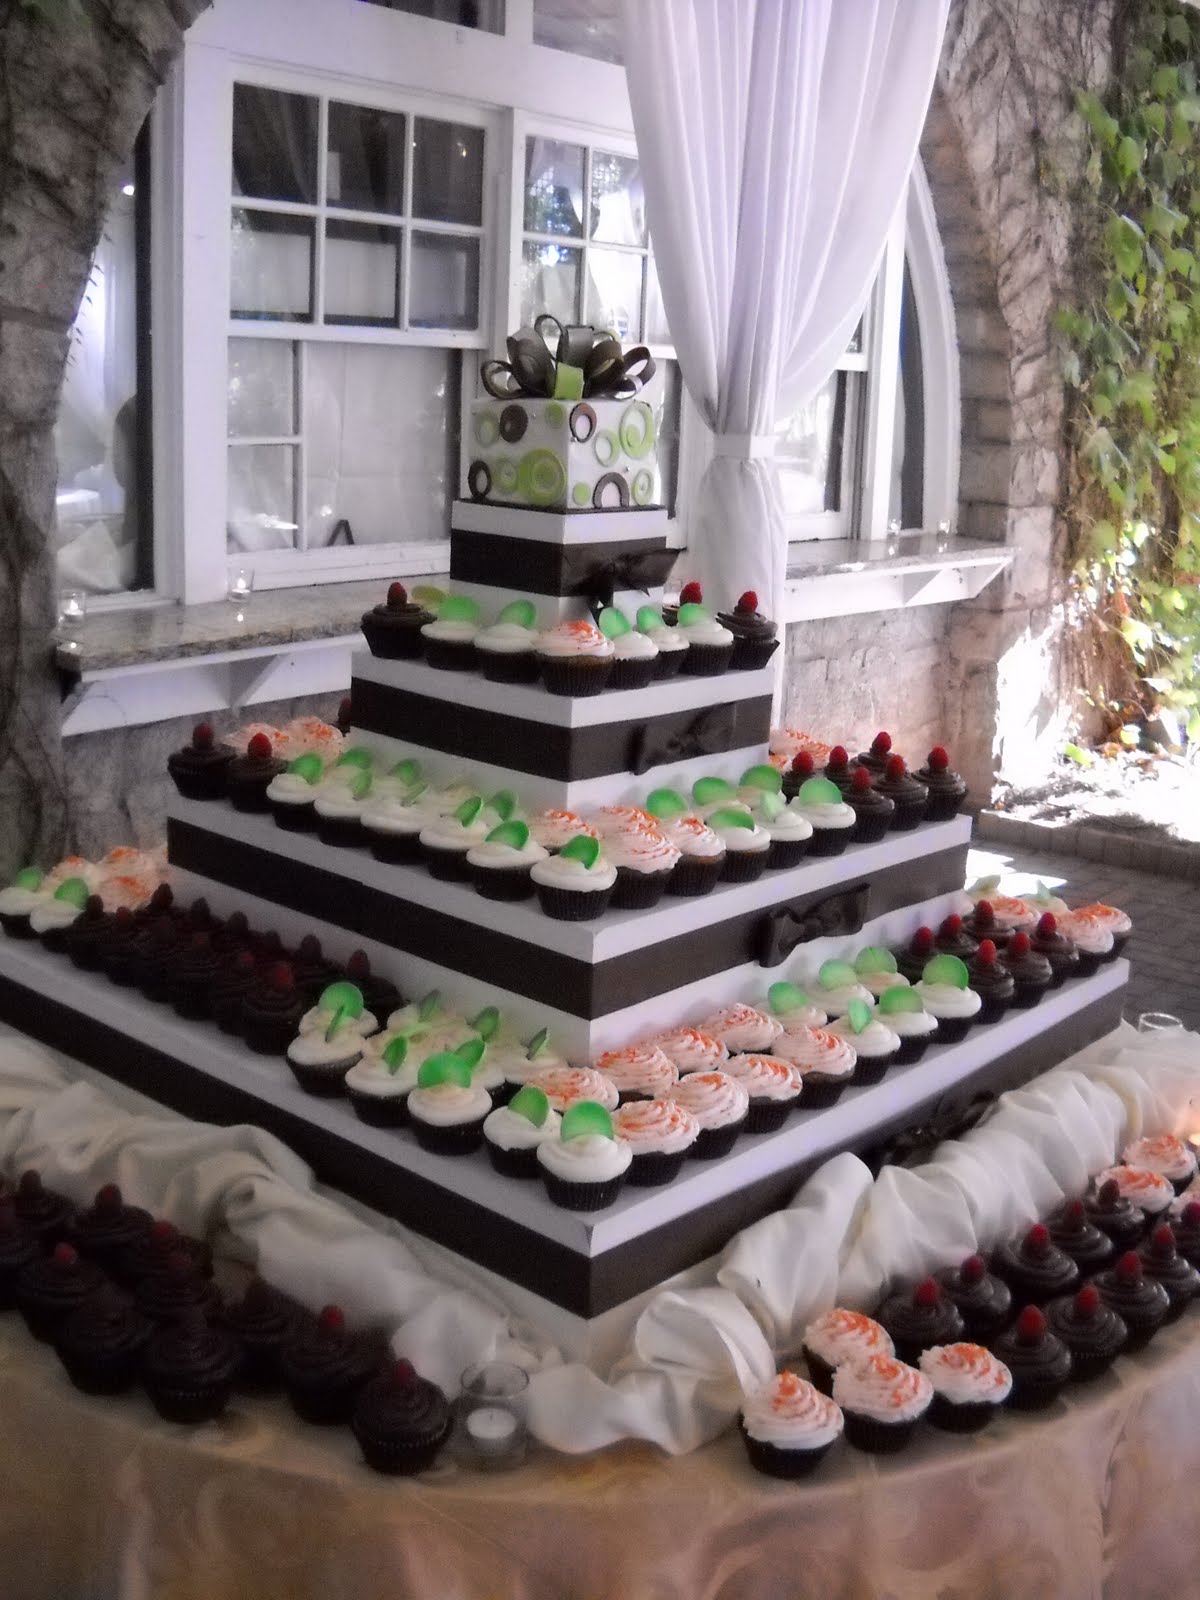 there are wedding cupcakes